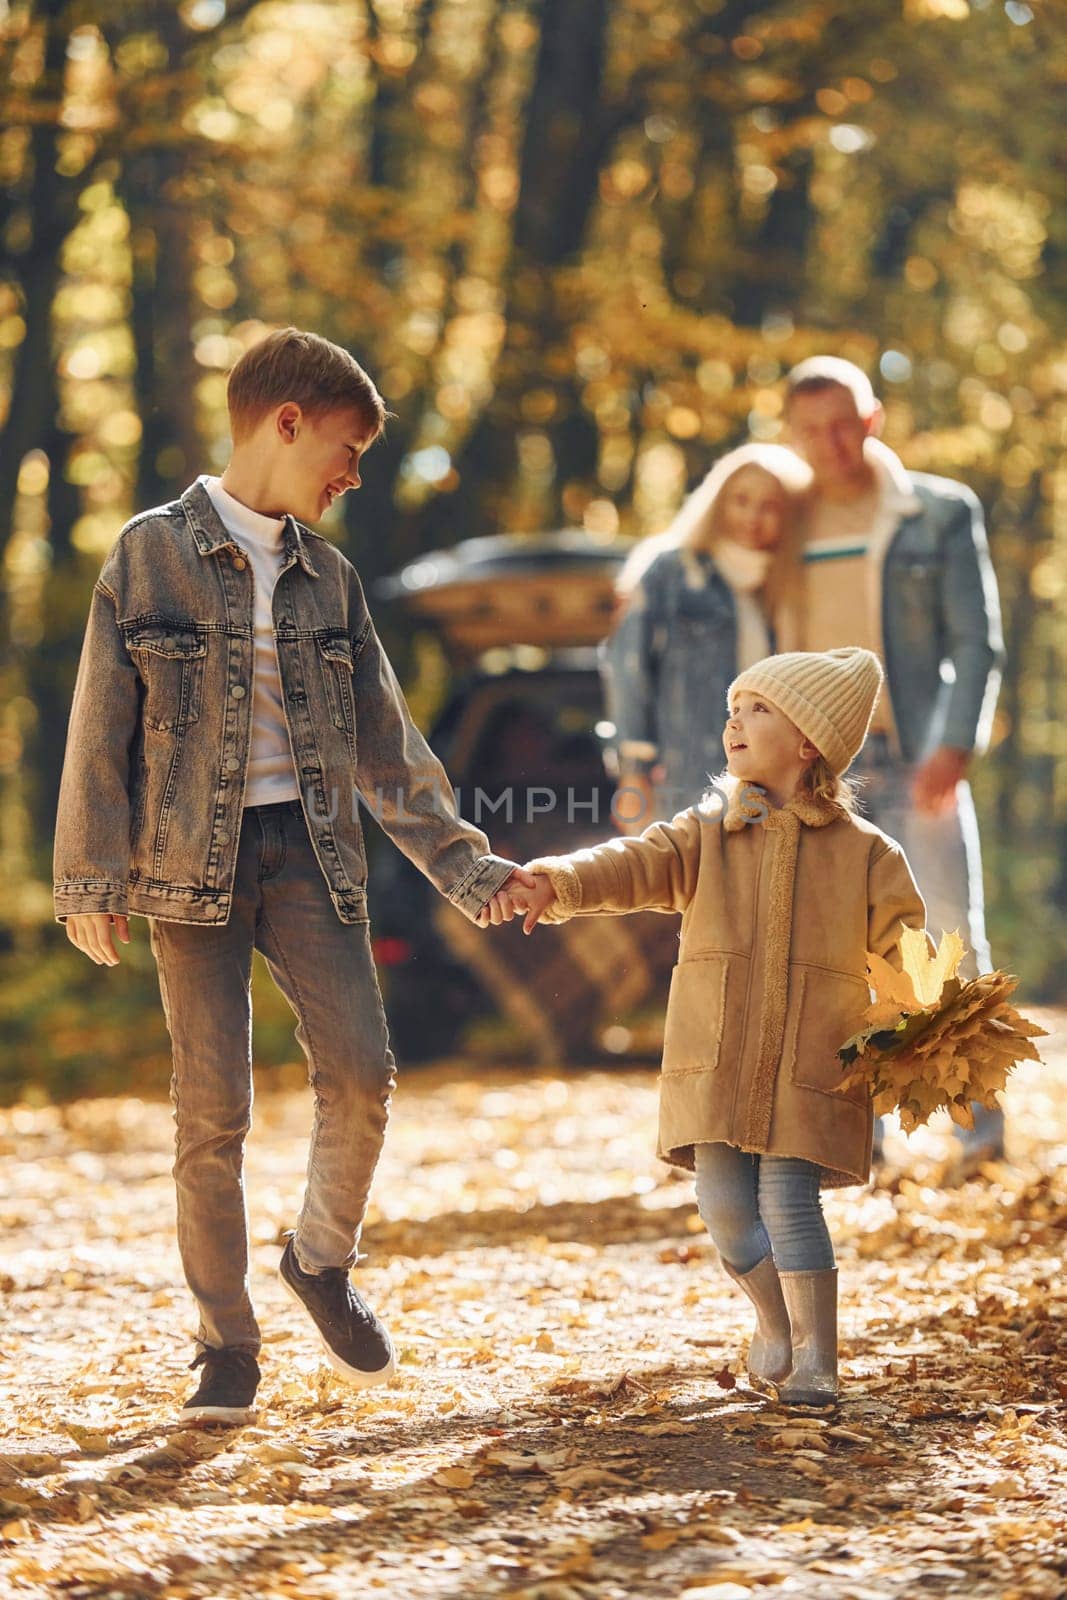 Sister with brother walking. Happy family is in the park at autumn time together.